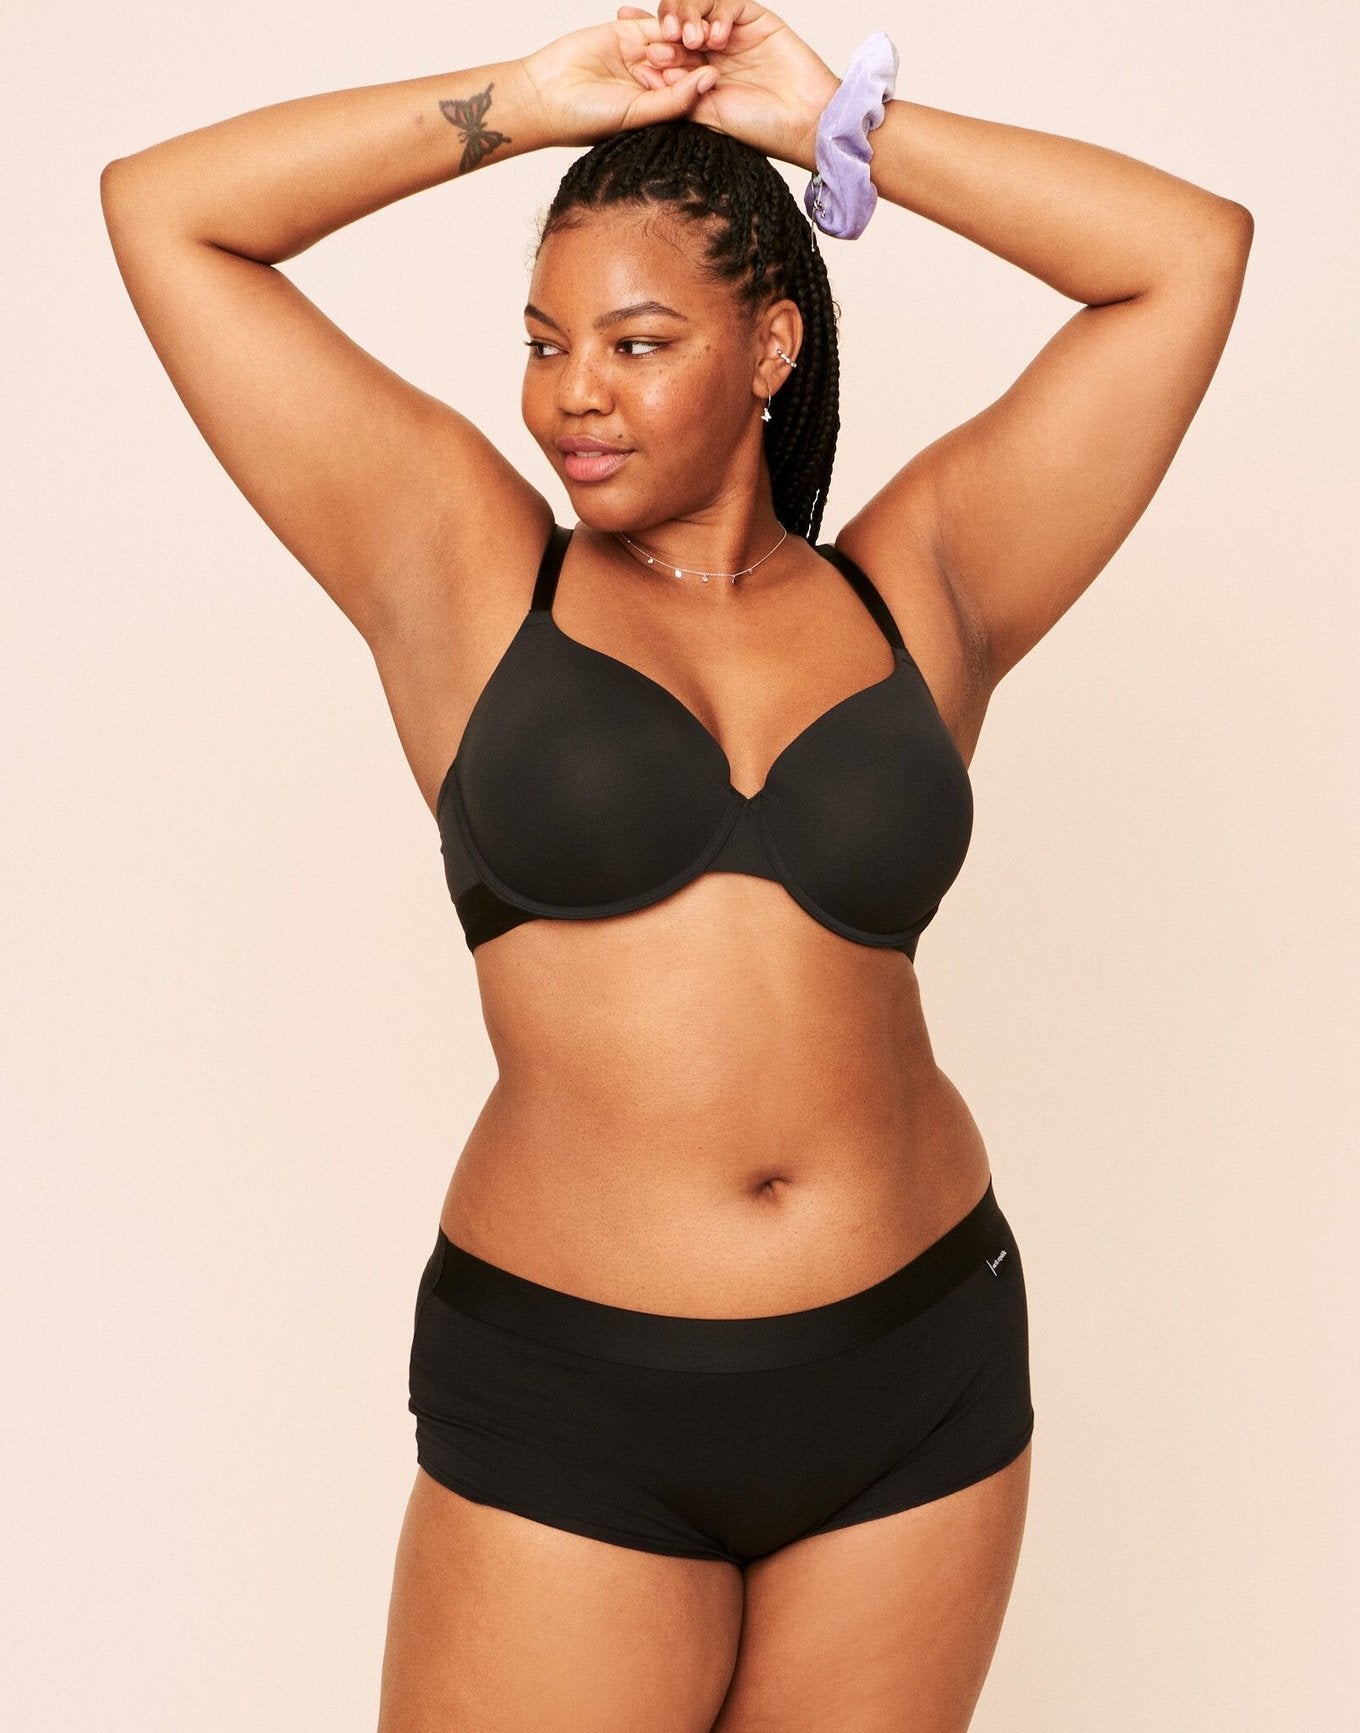 Earth Republic Jaliyah Lightly Lined Bra T-Shirt Bra in color Jet Black and shape full coverage